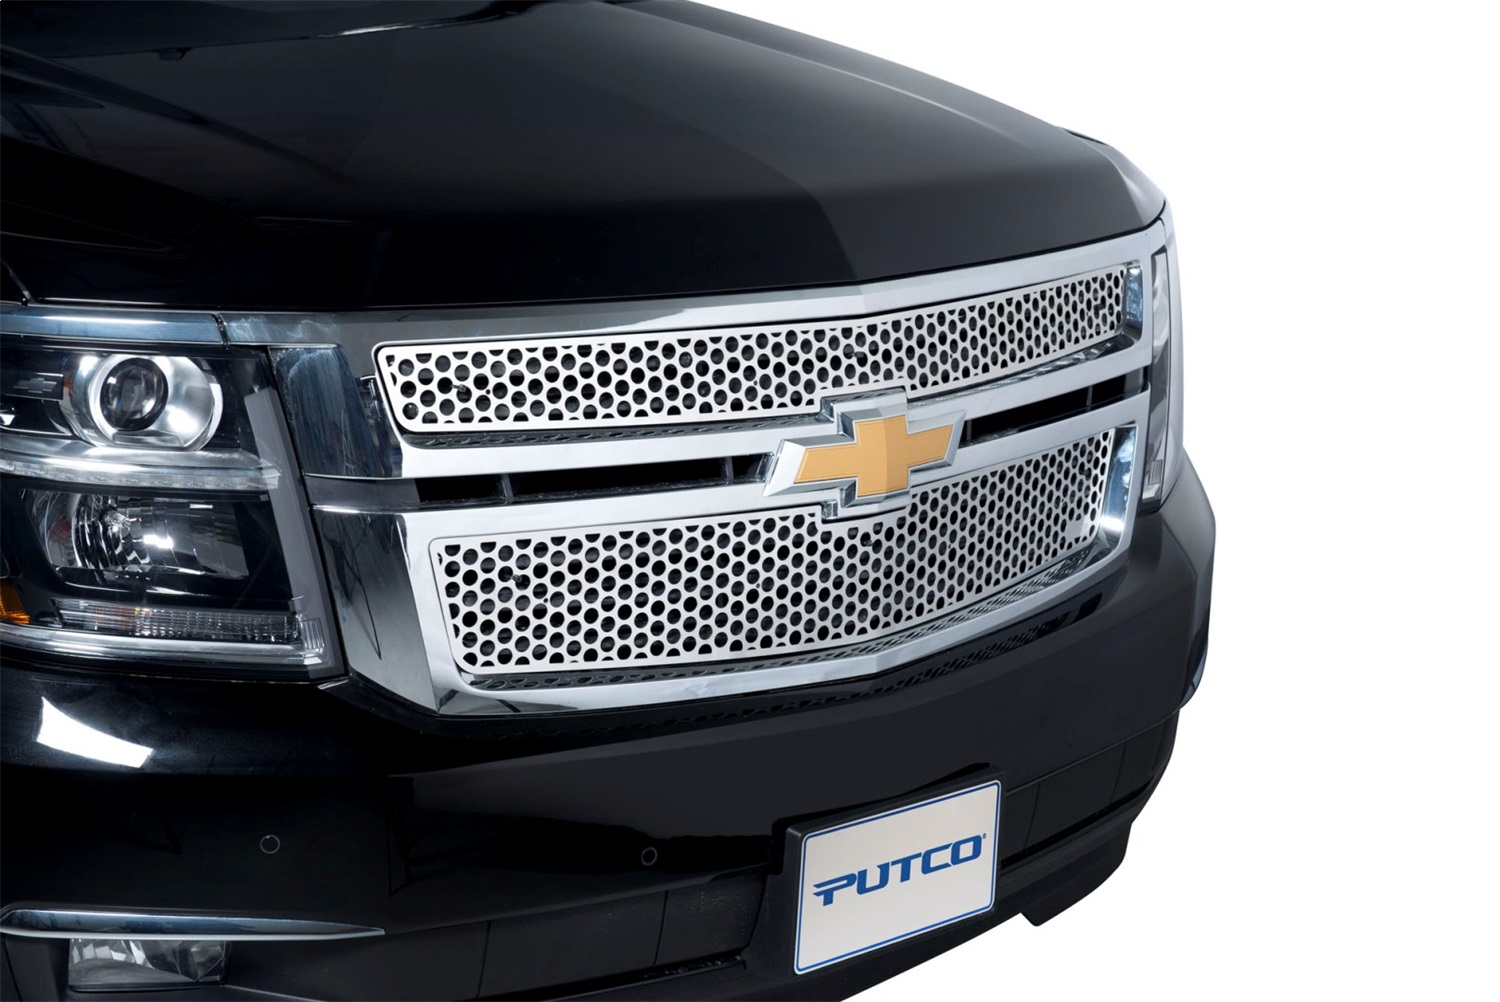 Putco 84203 Billet Grille, Stainless Steel Grille Insert - image 3 of 4